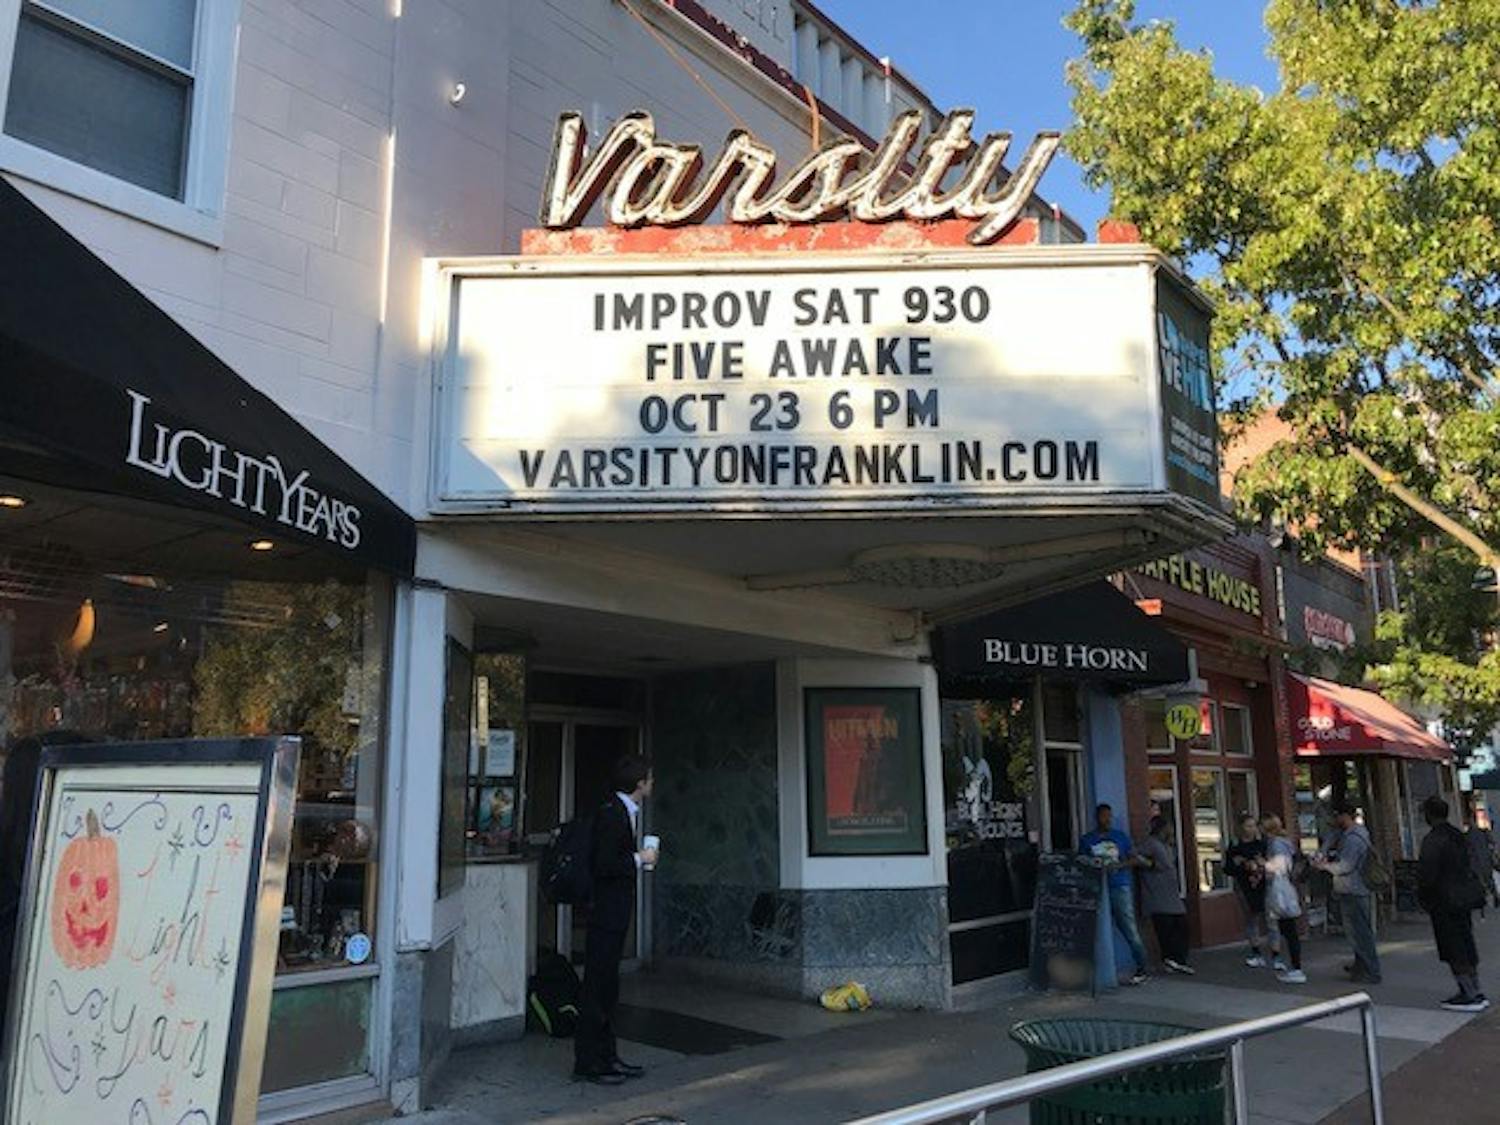 The Compass Center hosted a screening of "Five Awake" at the Varsity Theatre.